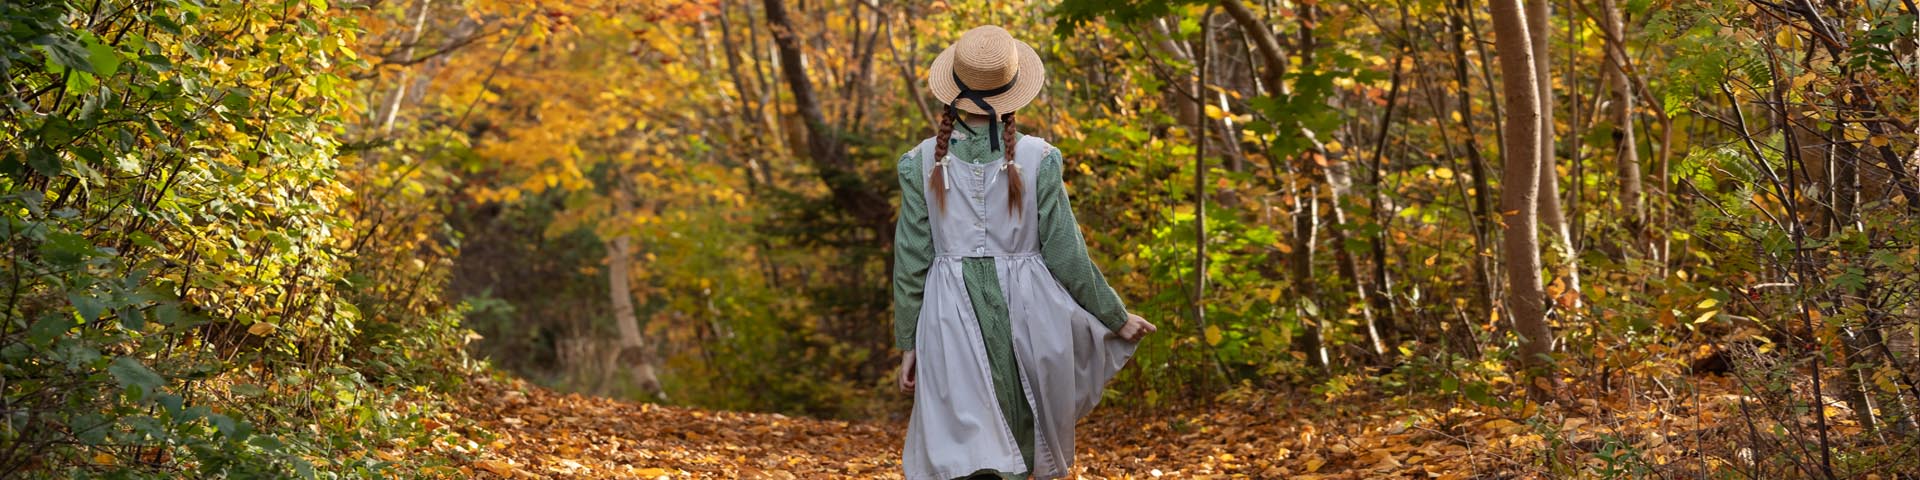 A young woman dressed as the fictional character Anne Shirley walks down a dirt laneway in the fall.